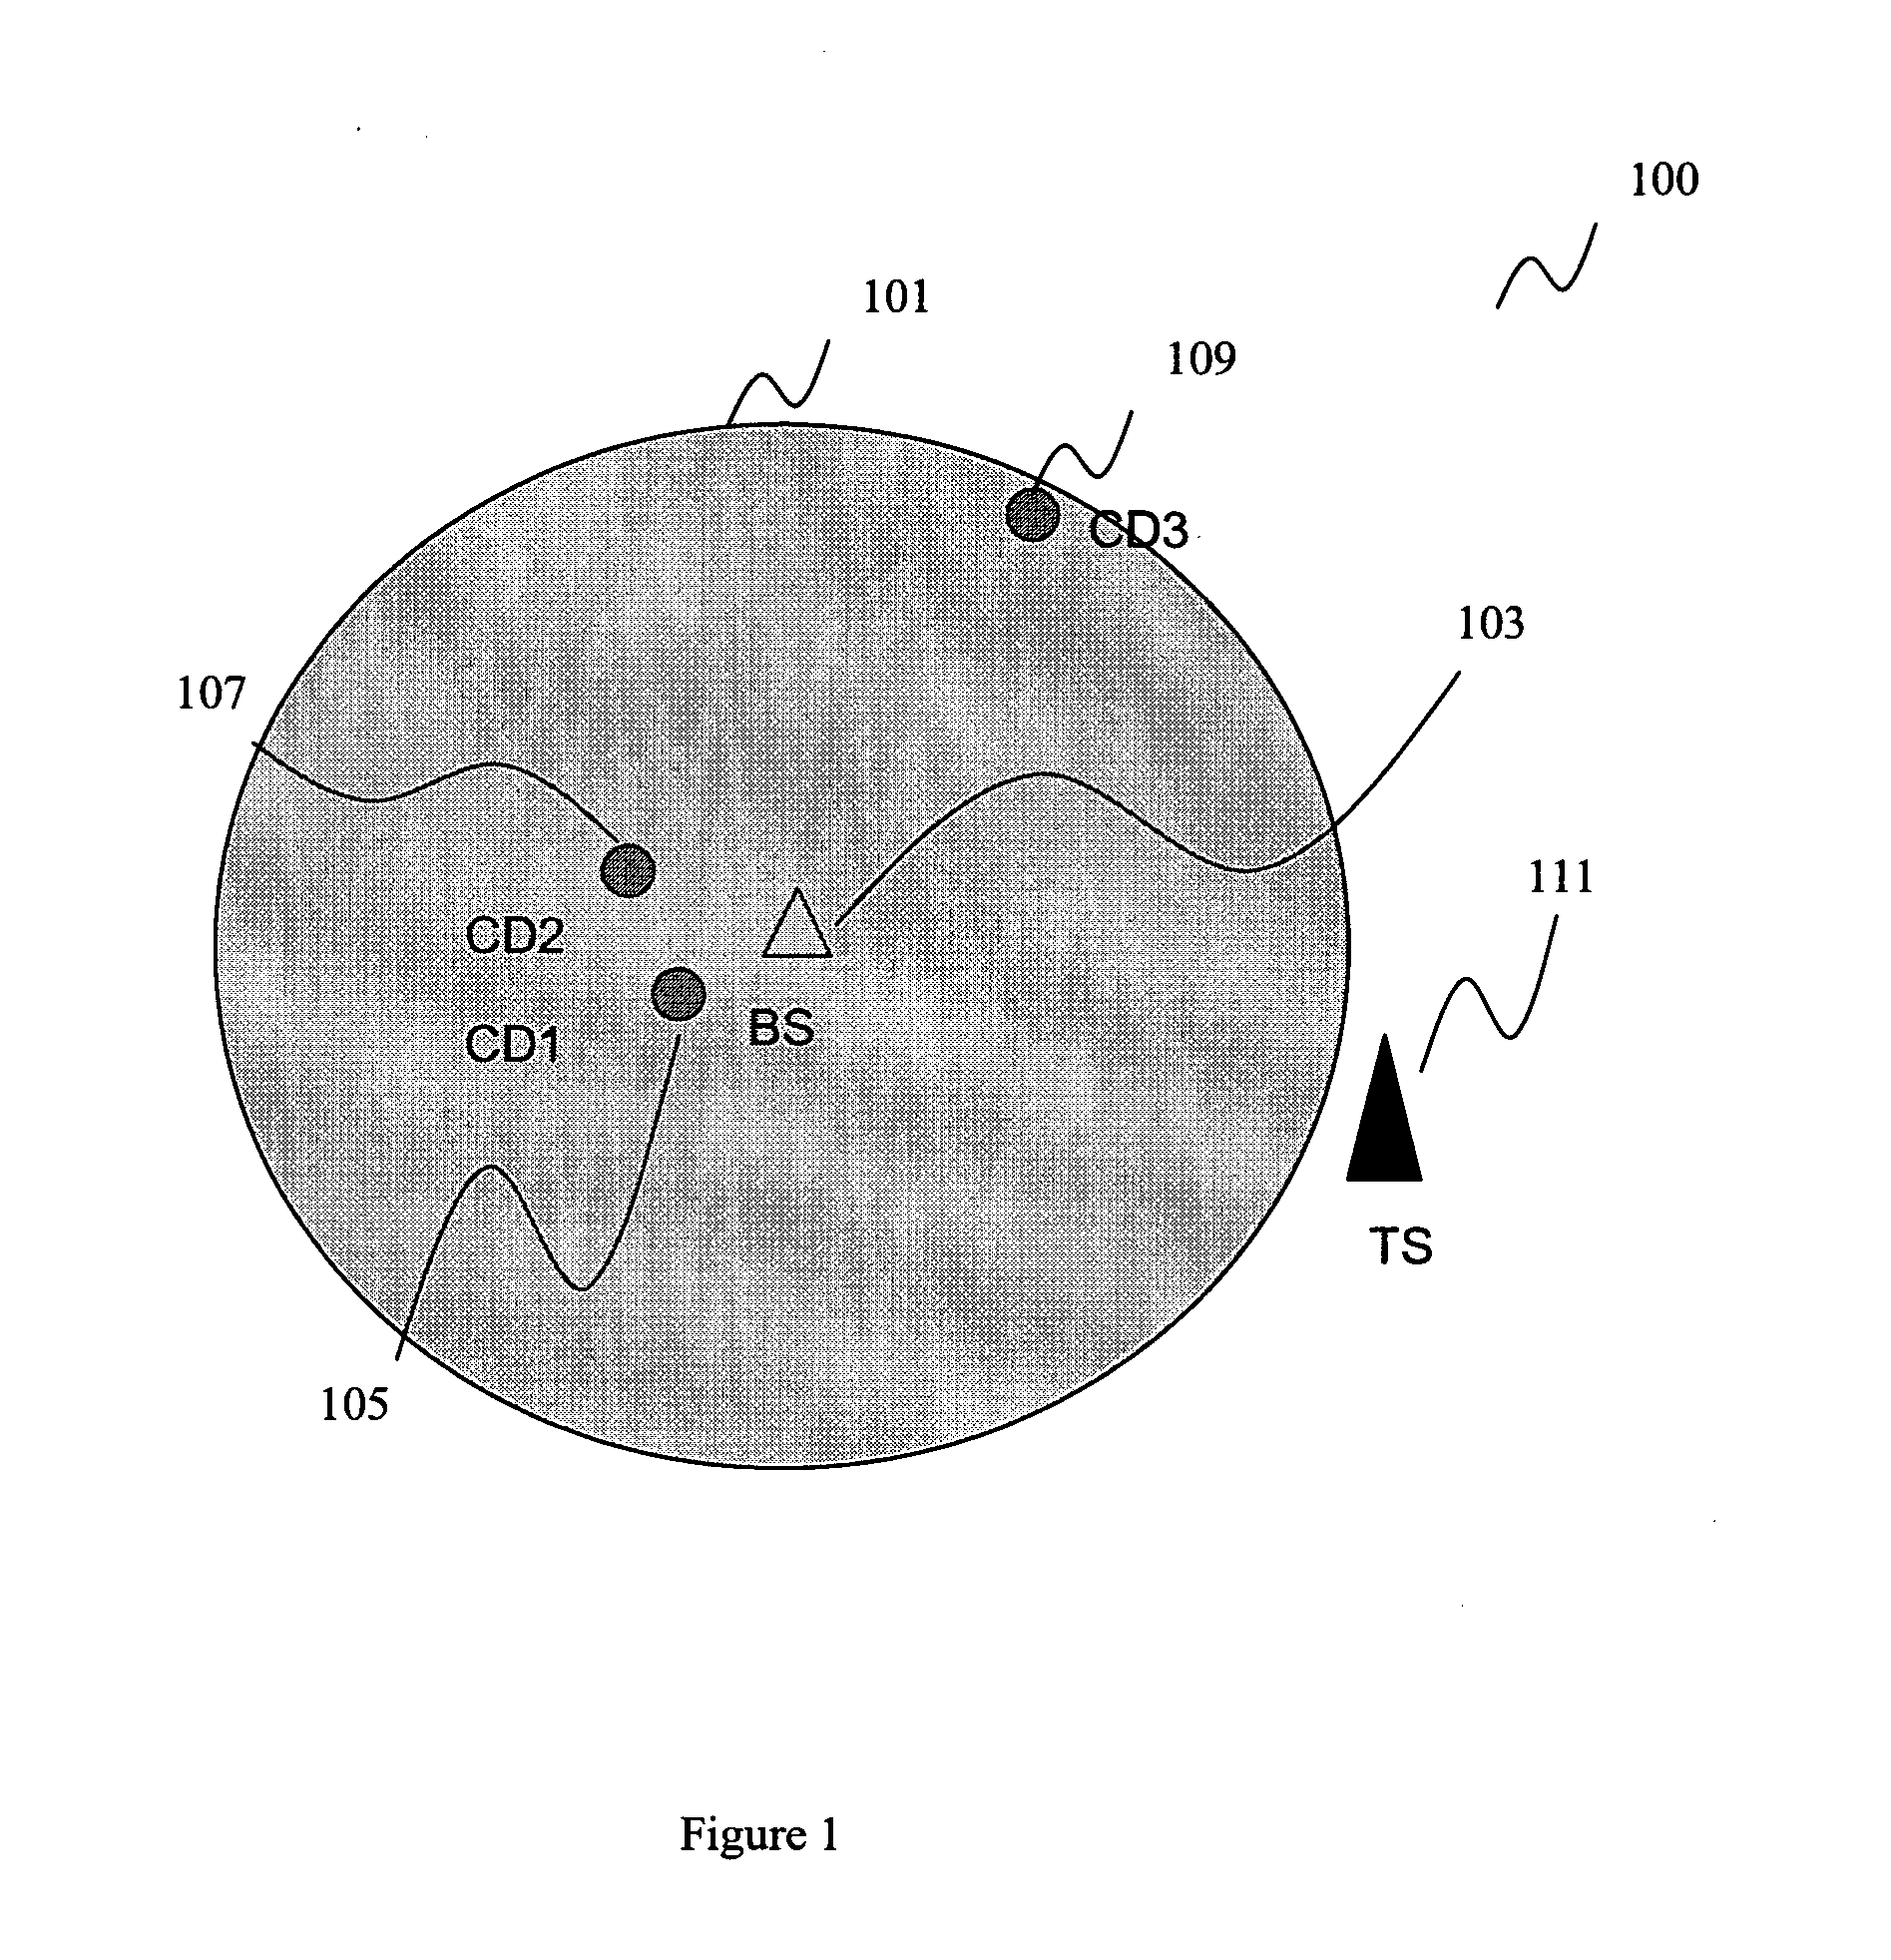 Method of determining as to whether a received signal includes an information signal